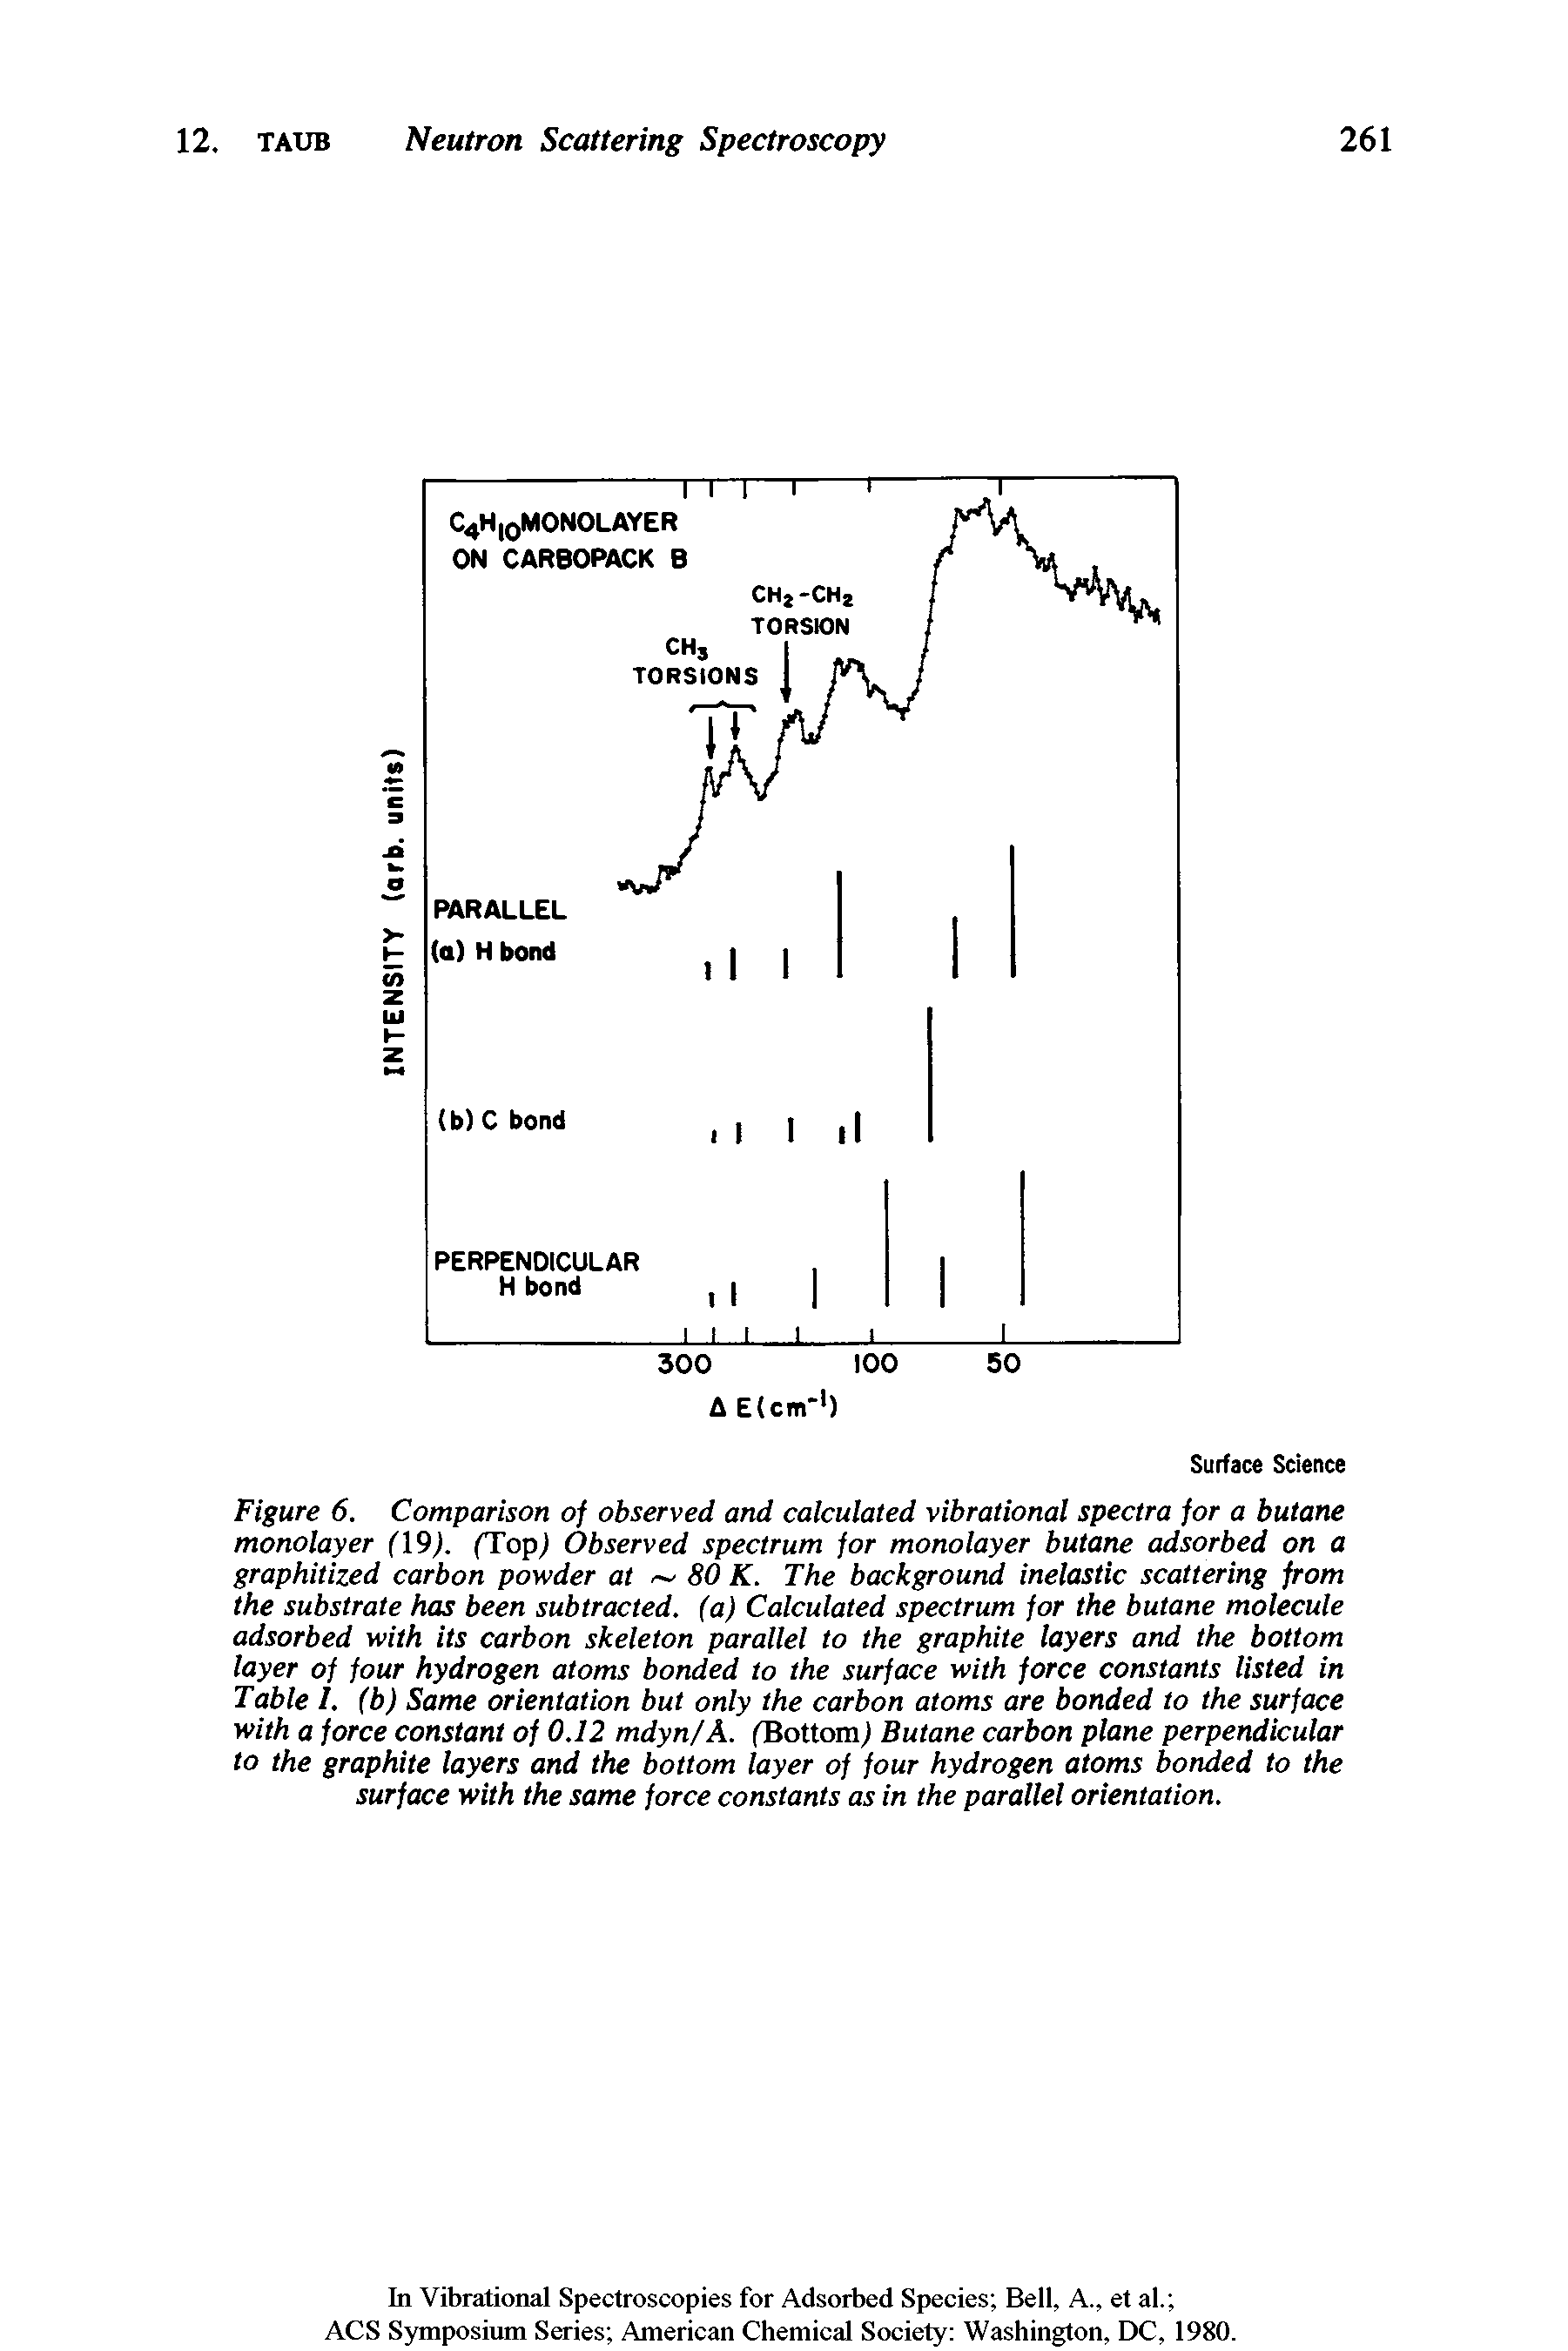 Figure 6. Comparison of observed and calculated vibrational spectra for a butane monolayer (19). (Topi Observed spectrum for monolayer butane adsorbed on a graphitized carbon powder at 80 K. The background inelastic scattering from the substrate has been subtracted, (a) Calculated spectrum for the butane molecule adsorbed with its carbon skeleton parallel to the graphite layers and the bottom layer of four hydrogen atoms bonded to the surface with force constants listed in Table I. (b) Same orientation but only the carbon atoms are bonded to the surface with a force constant of 0.12 mdyn/A. (Bottom) Butane carbon plane perpendicular to the graphite layers and the bottom layer of four hydrogen atoms bonded to the surface with the same force constants as in the parallel orientation.